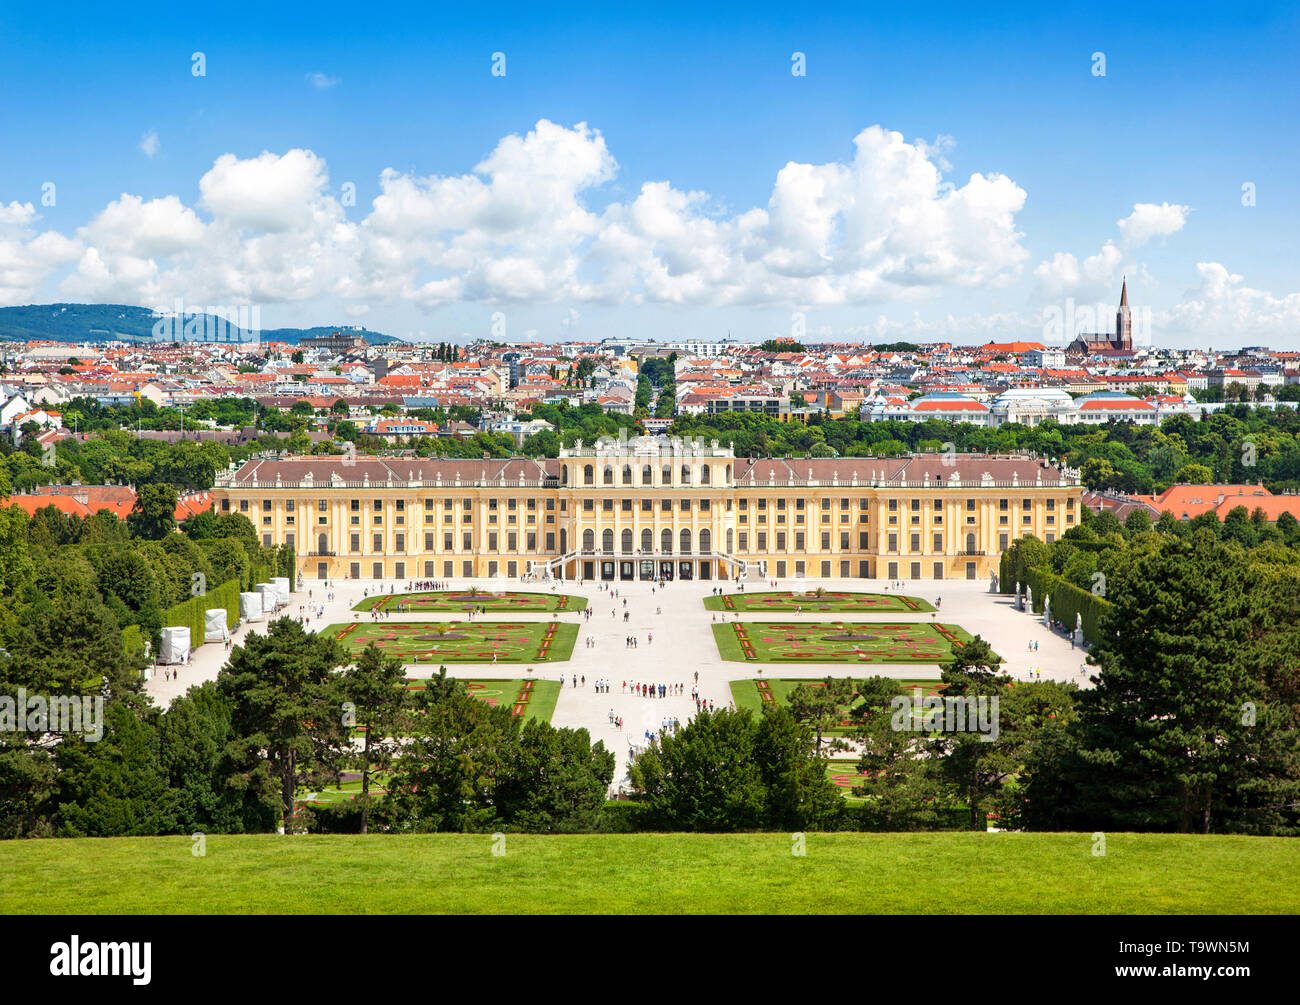 Beautiful view of famous Schoenbrunn Palace with Great Parterre garden in Vienna, Austria Stock Photo